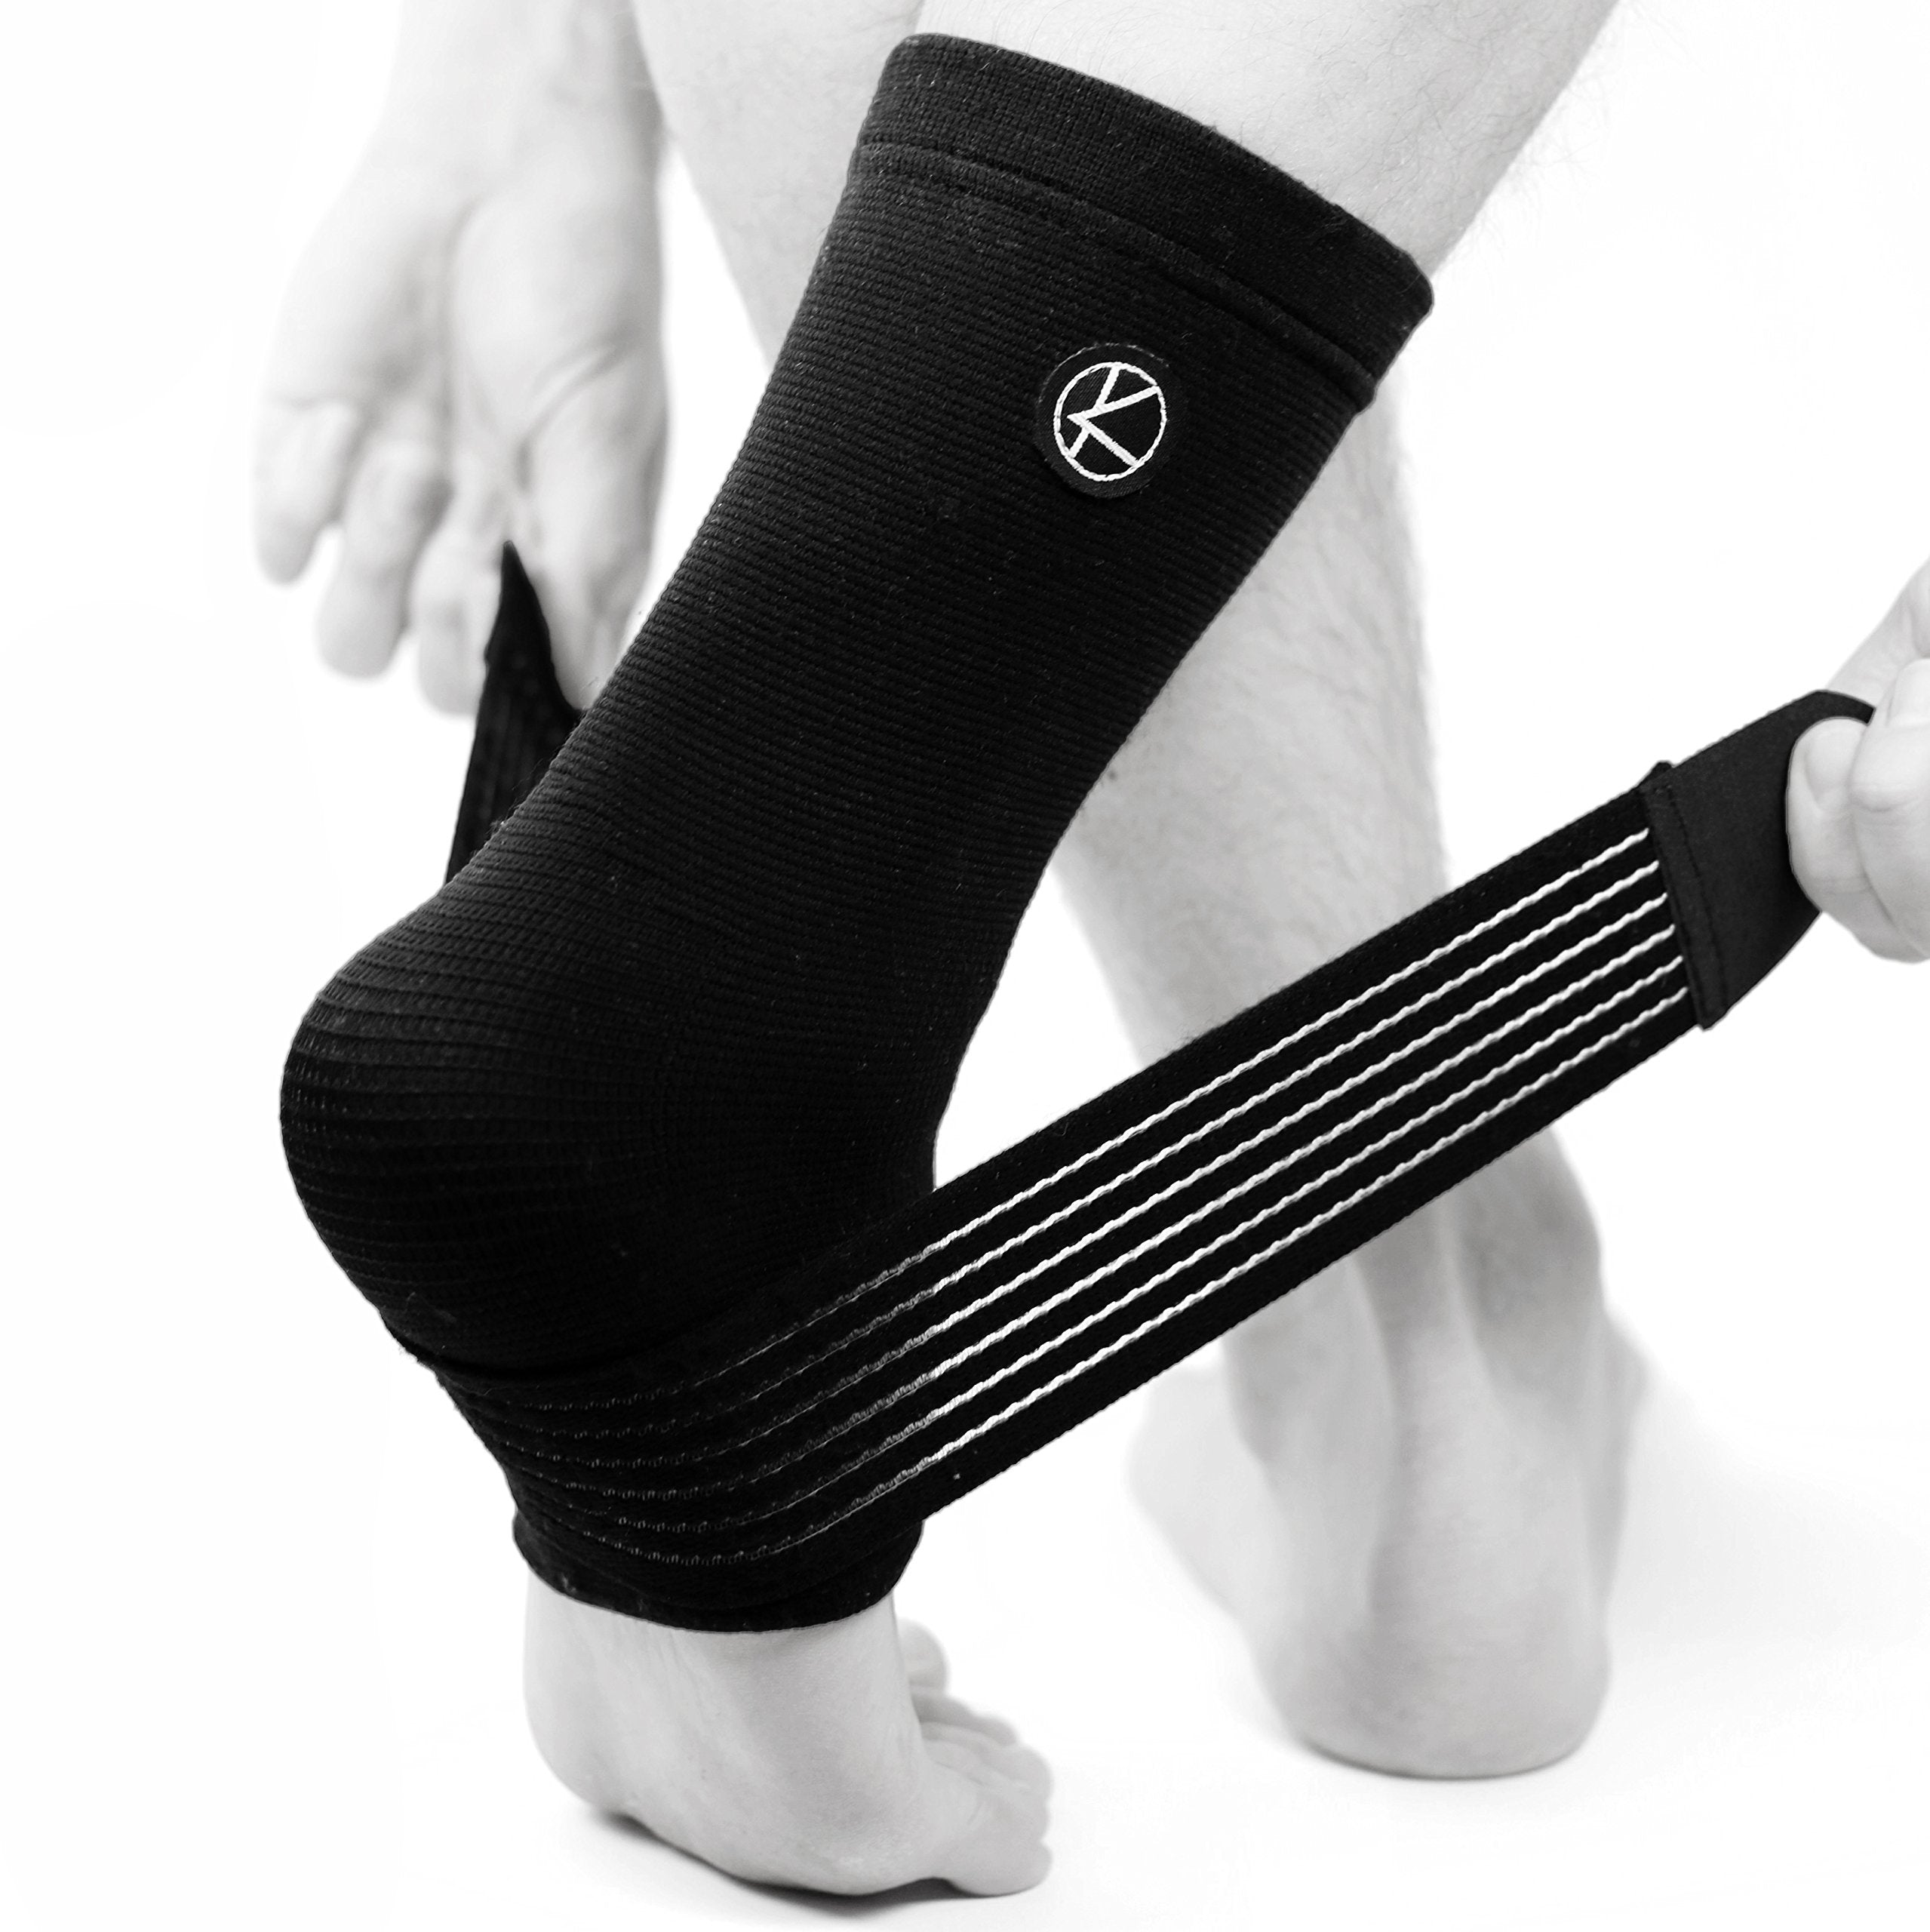 Achilles Tendonitis Brace - Ankle Sleeve for Plantar Fasciitis with Compression Wrap -Ankle Support for Women, Men, Pain, Sprained Ankle, Heel Spur, Arch Support, Swelling, Tendon, Kids